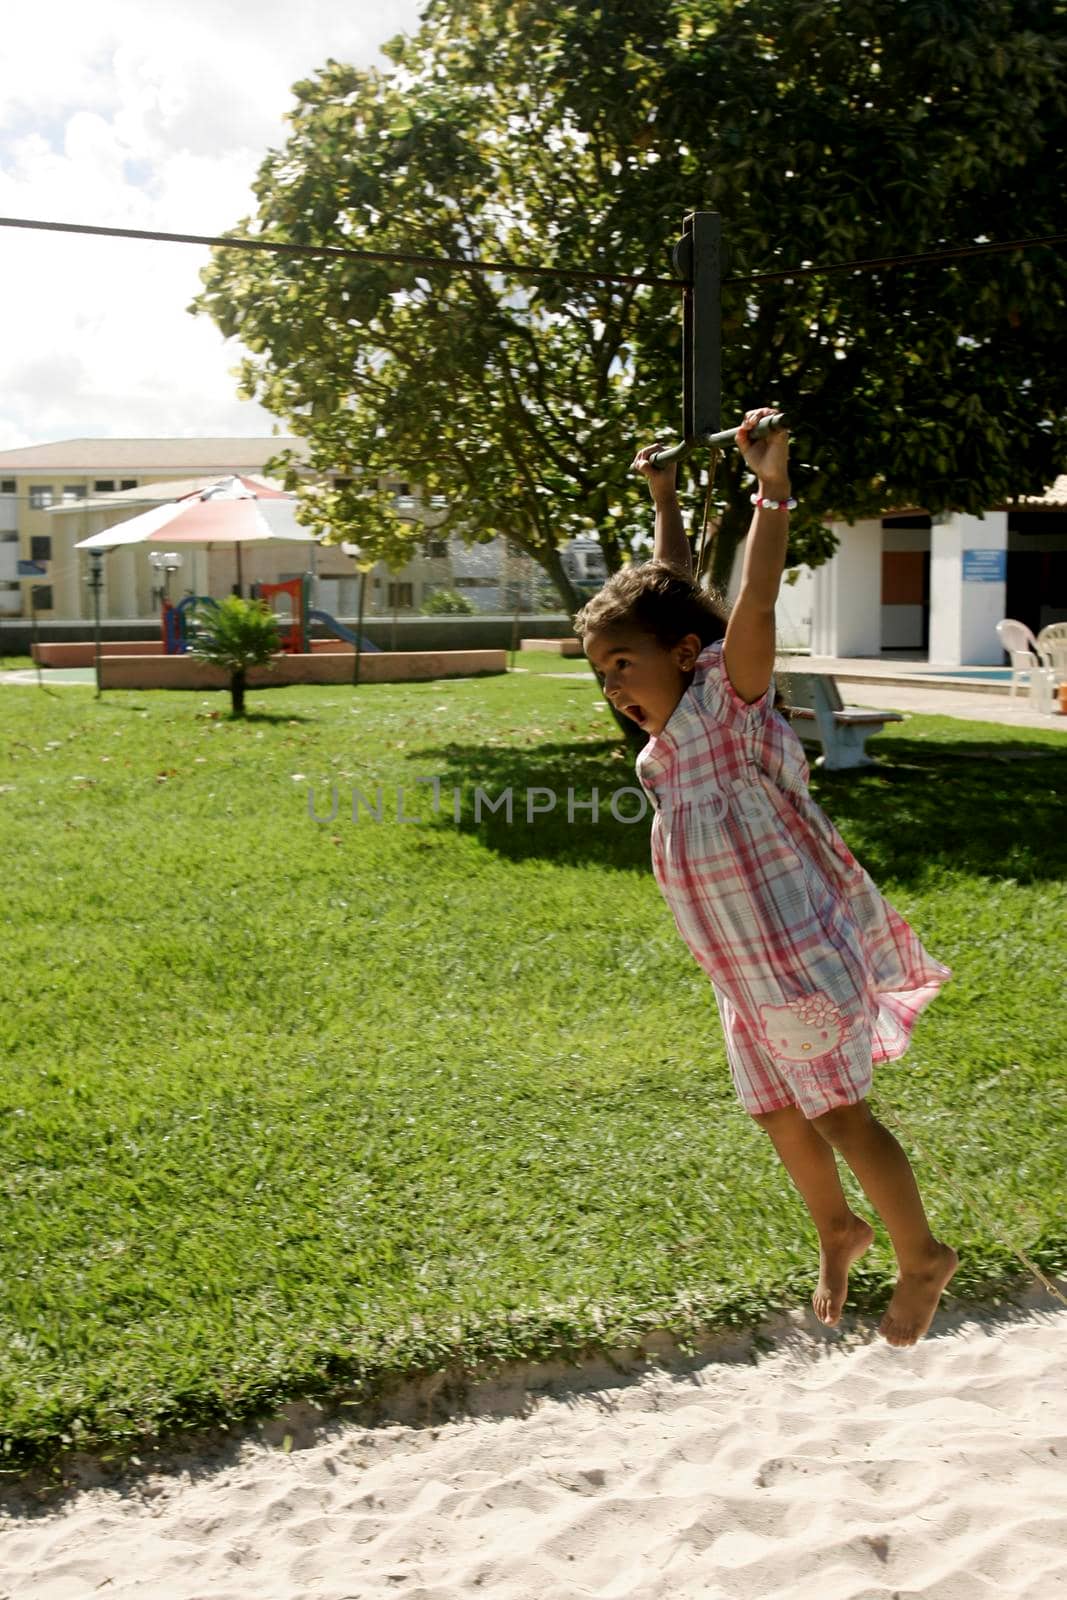 salvador, bahia / brazil - june 27, 2009: child is seen playing on zip lines in a condominium boat in the city of Salvador.